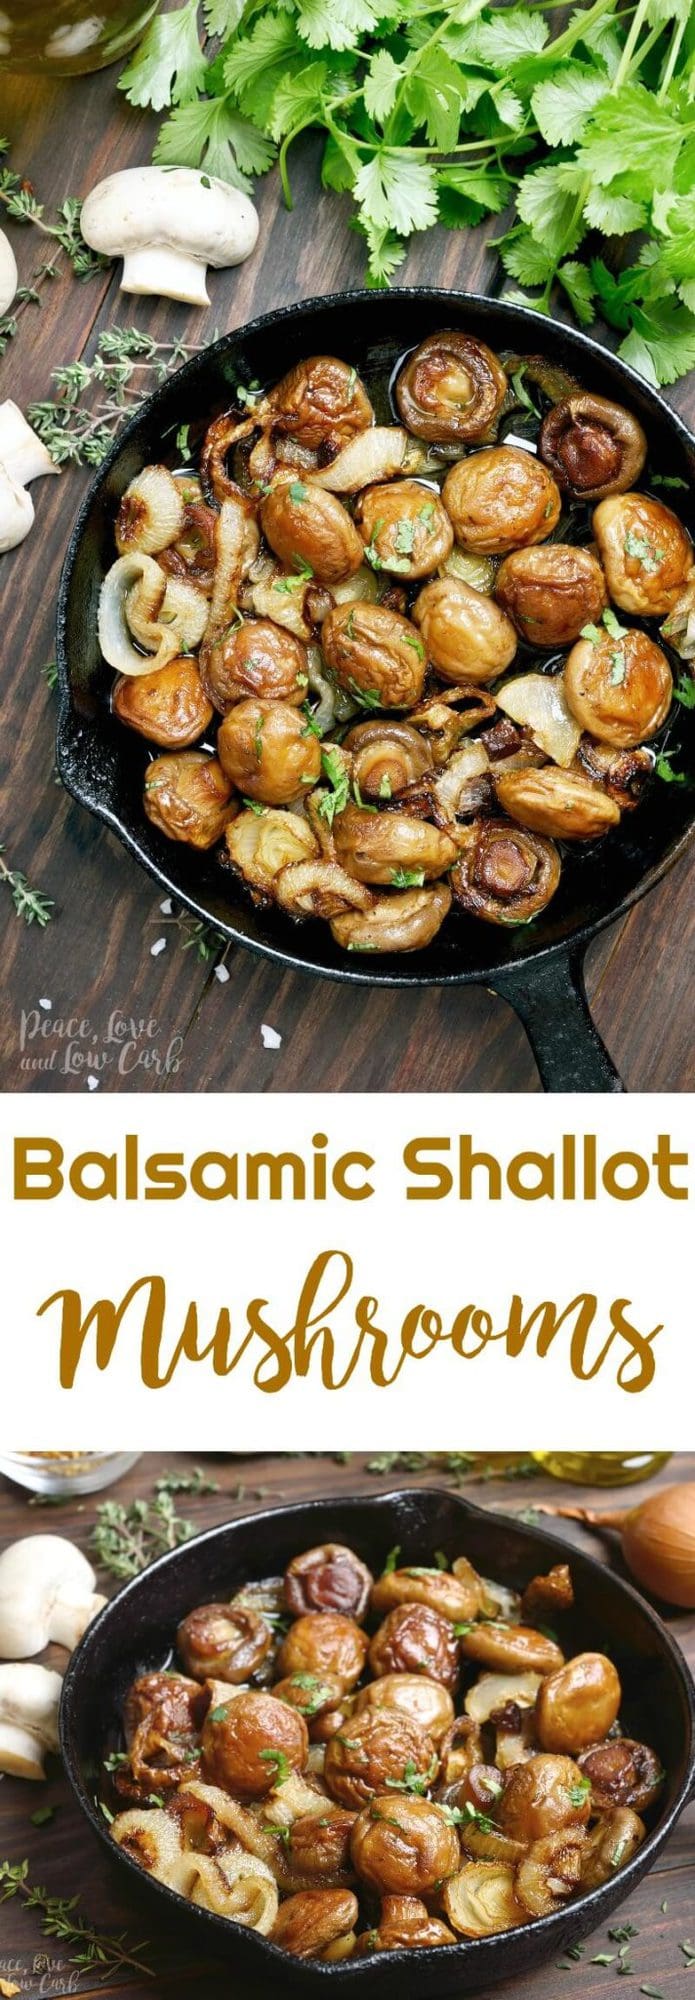 Balsamic Shallot Mushrooms | Peace Love and Low Carb